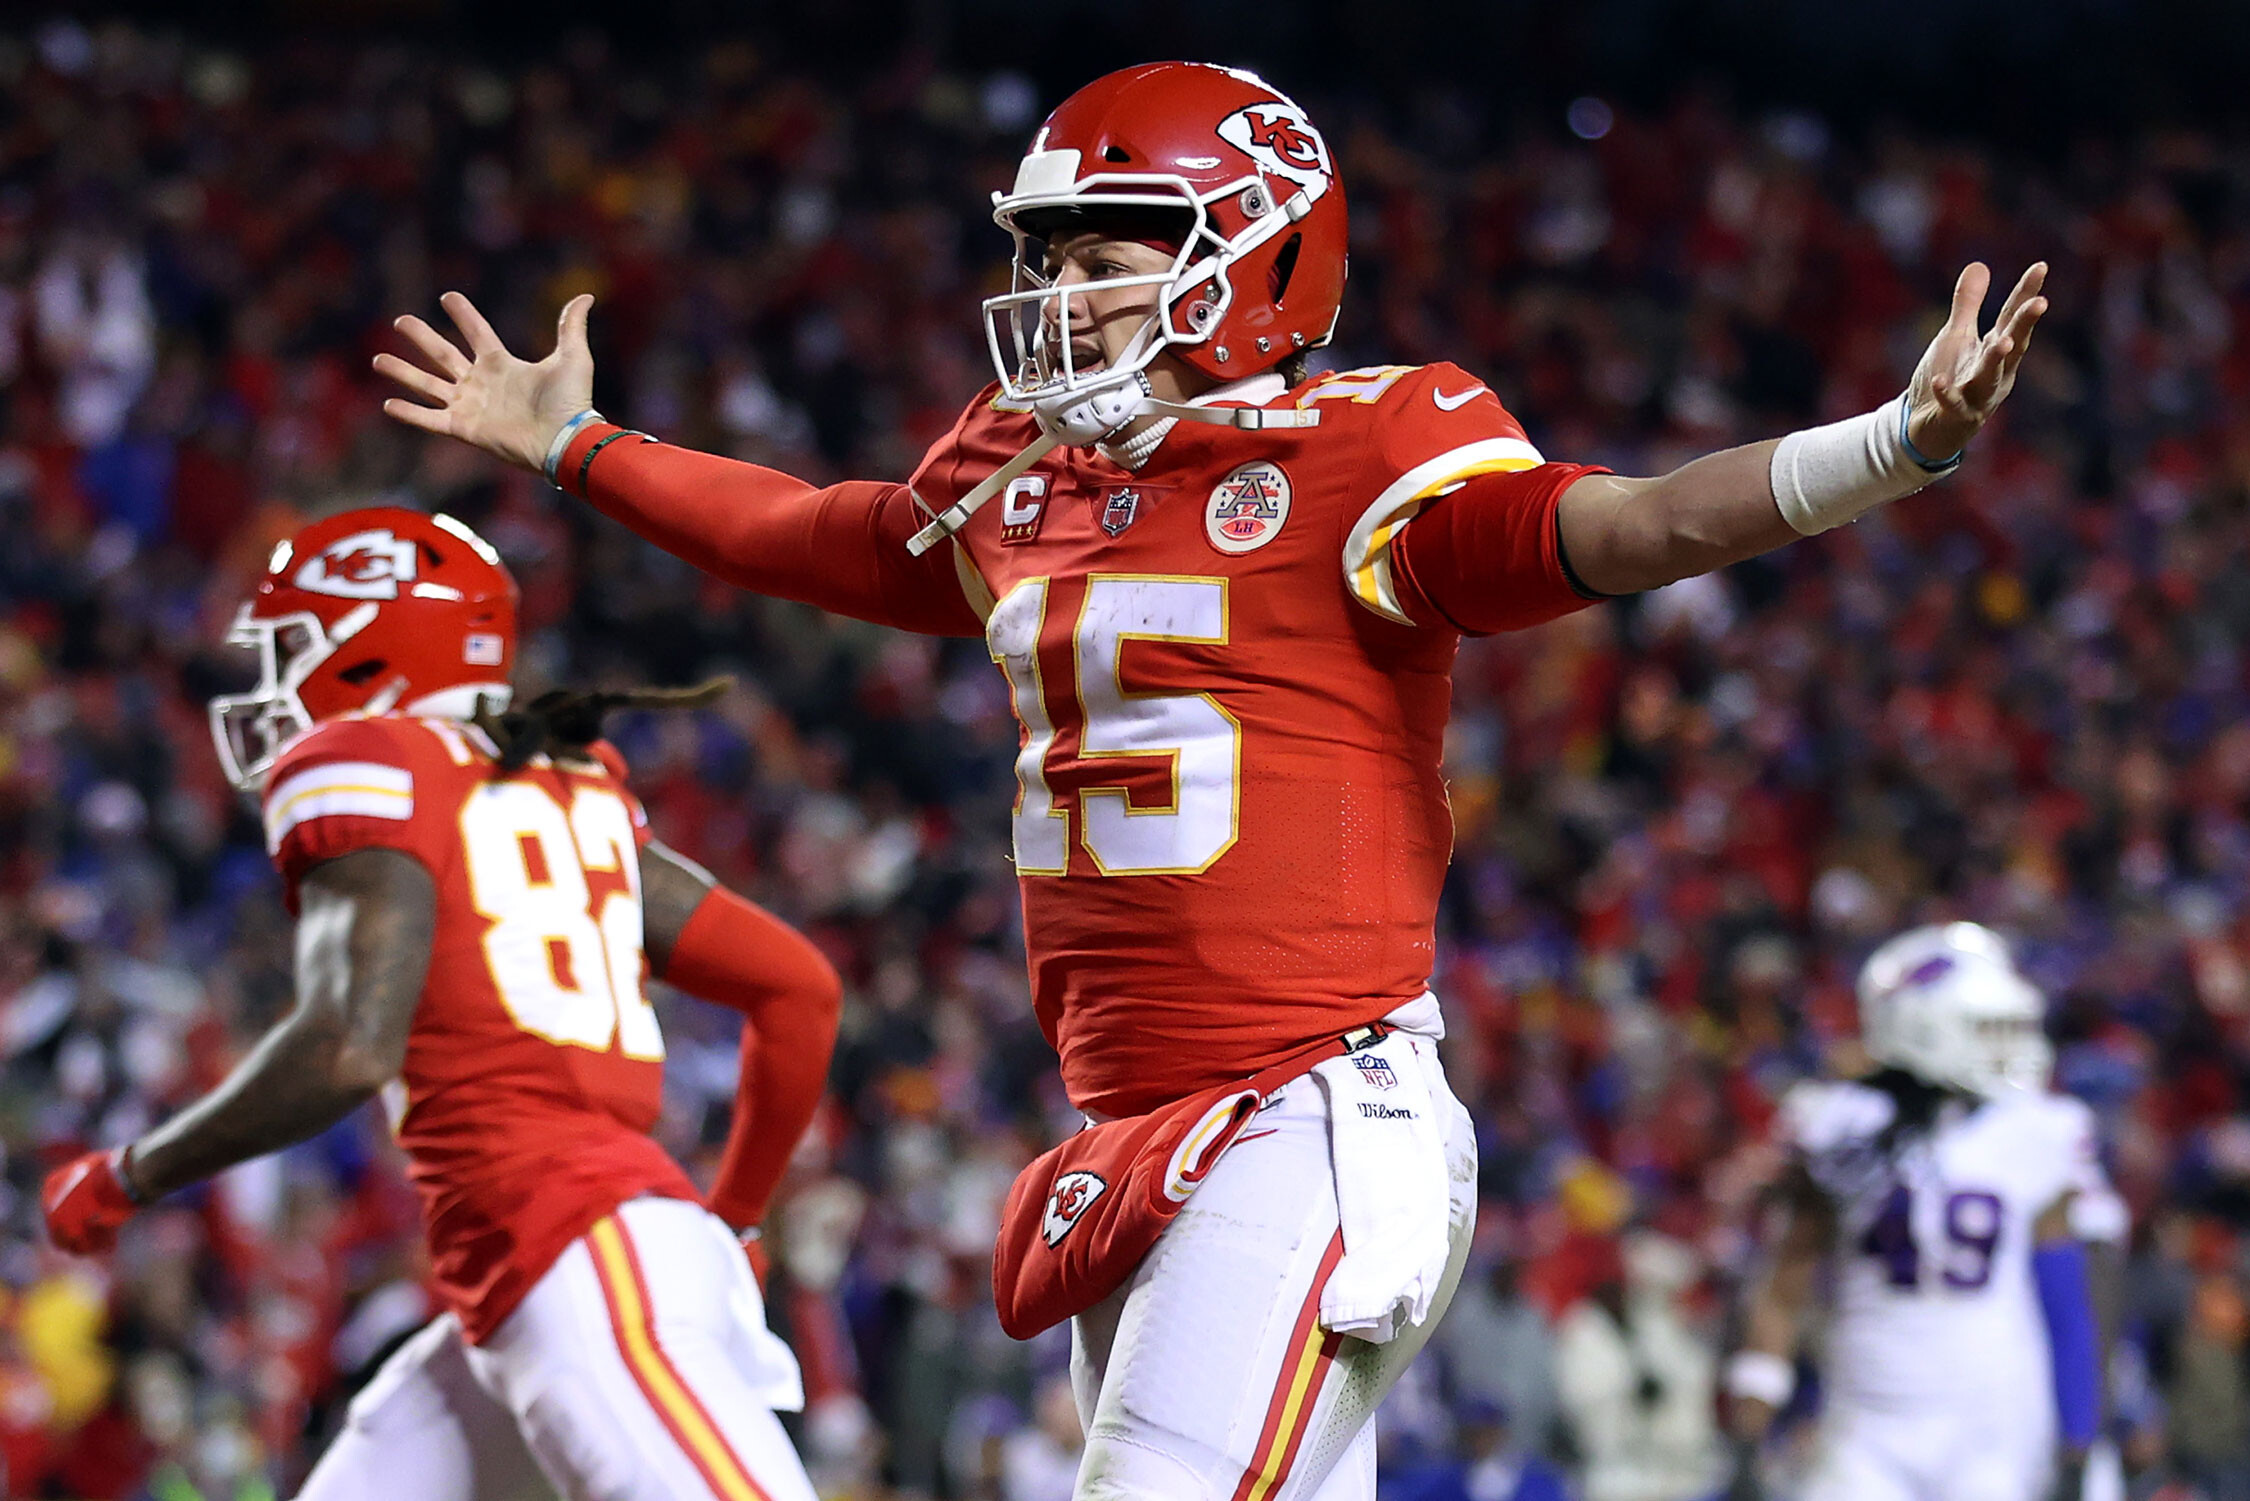 Patrick Mahomes Goes 'Grim Reaper' As Kansas City Chiefs Defeat The Buffalo Bills In Epic Back And Forth Overtime Battle